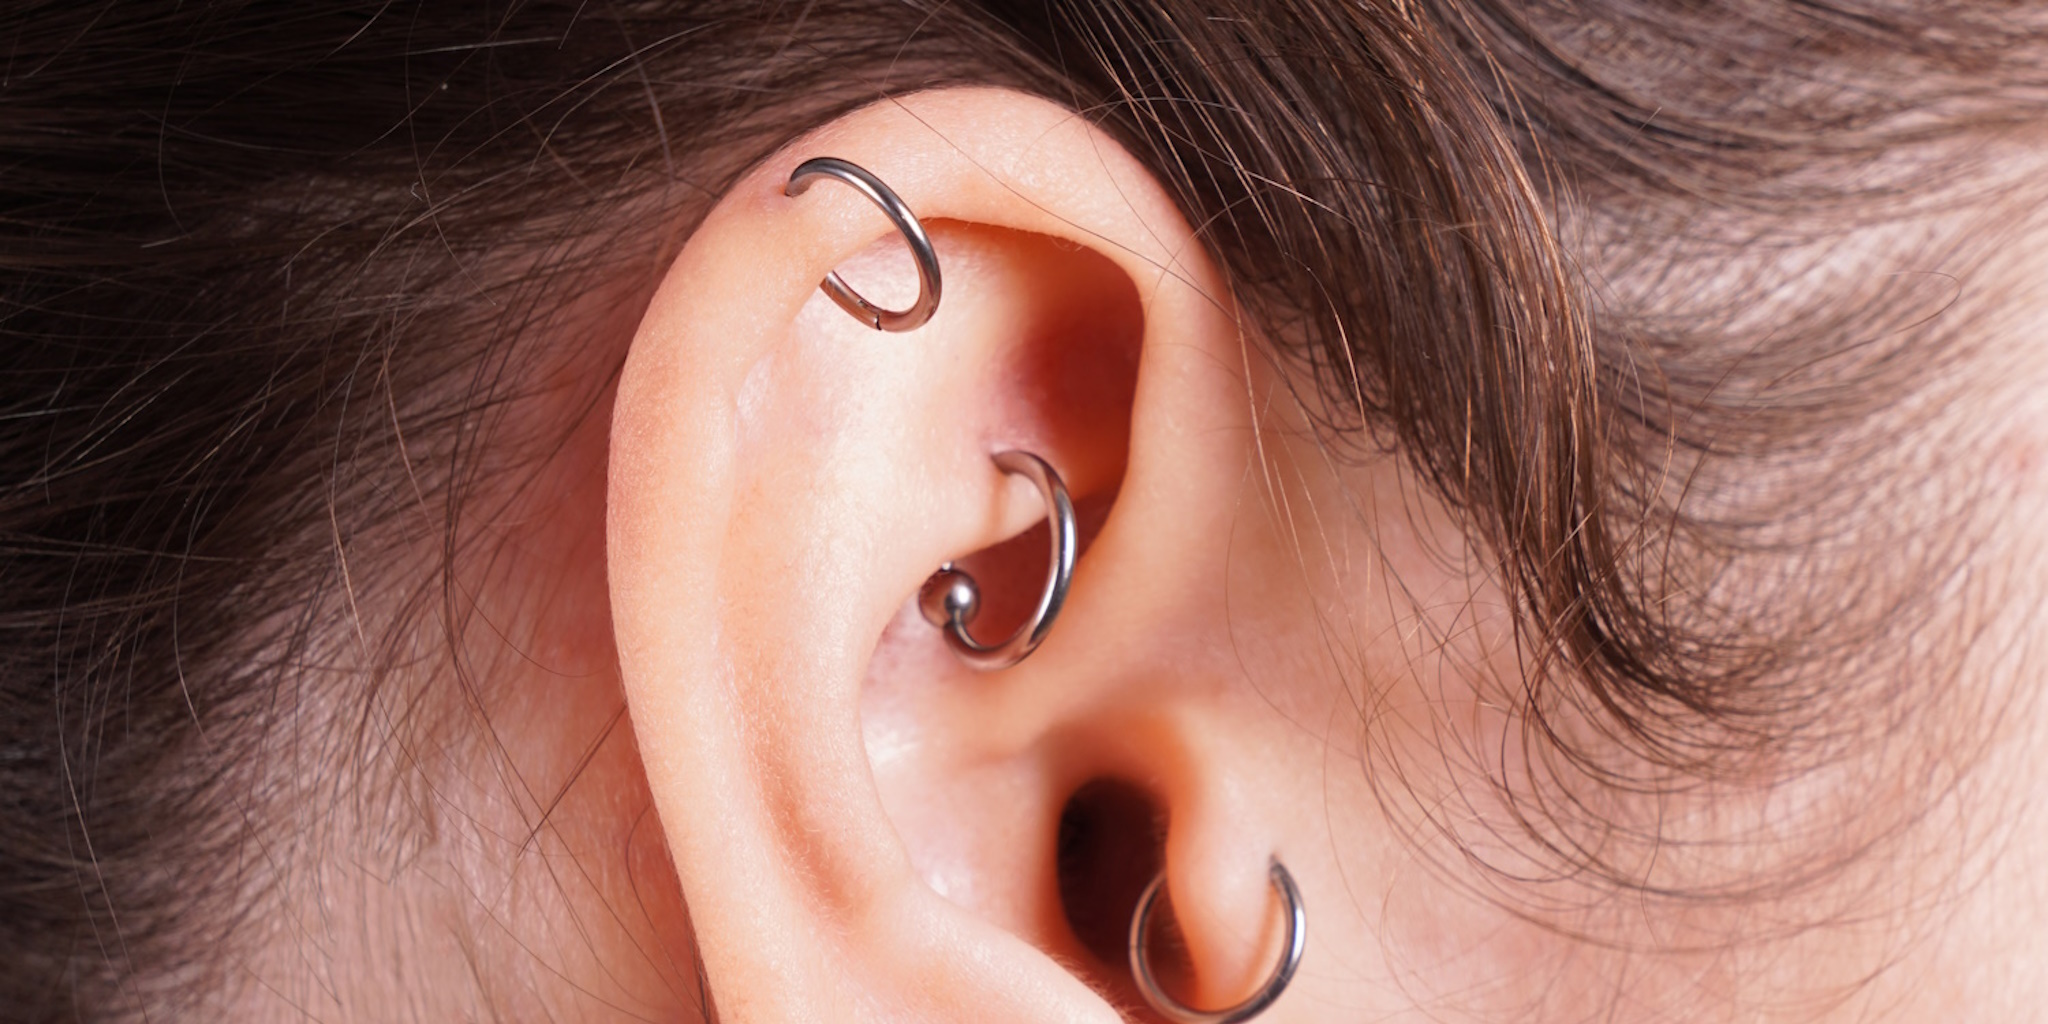 A female with a rook piercing, cartilage piercing, and tragus piercing.